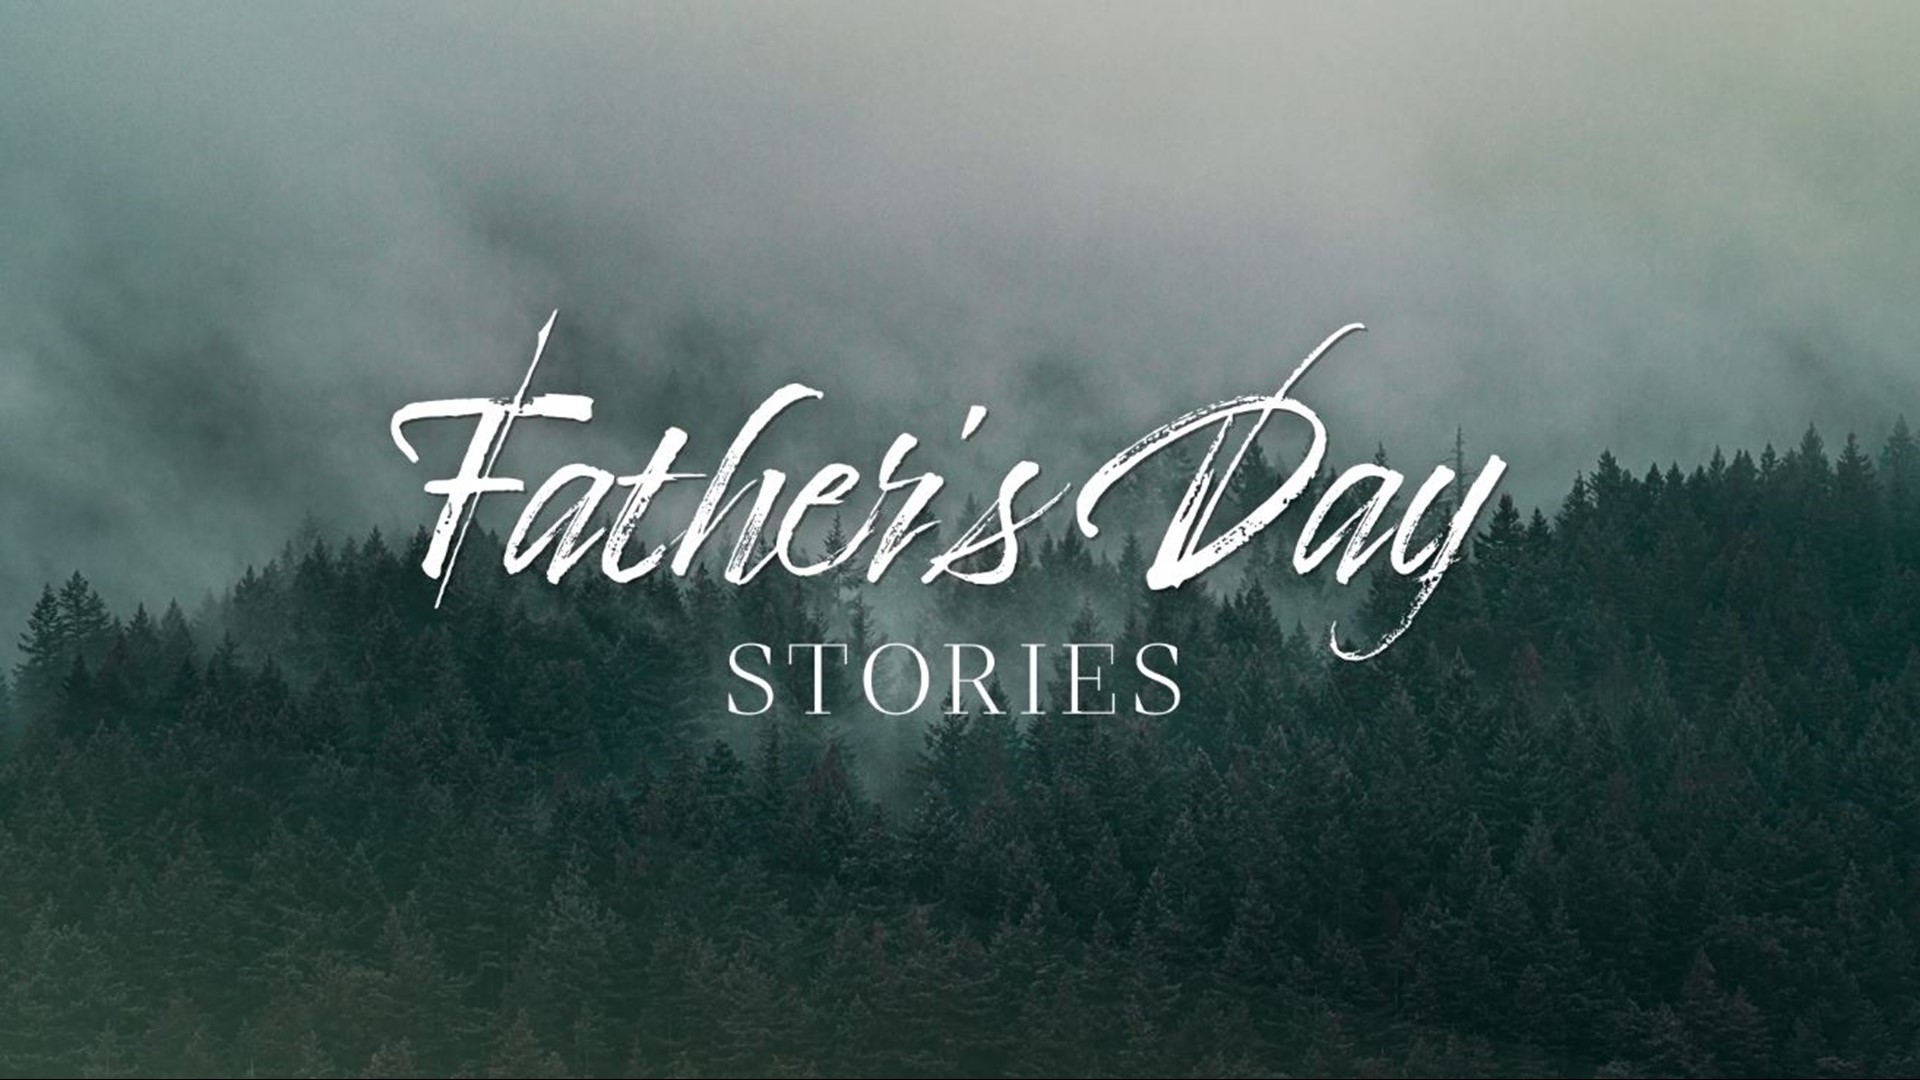 A collection of HeartThread stories focused on fathers and father figures as we celebrate Father's Day in June.